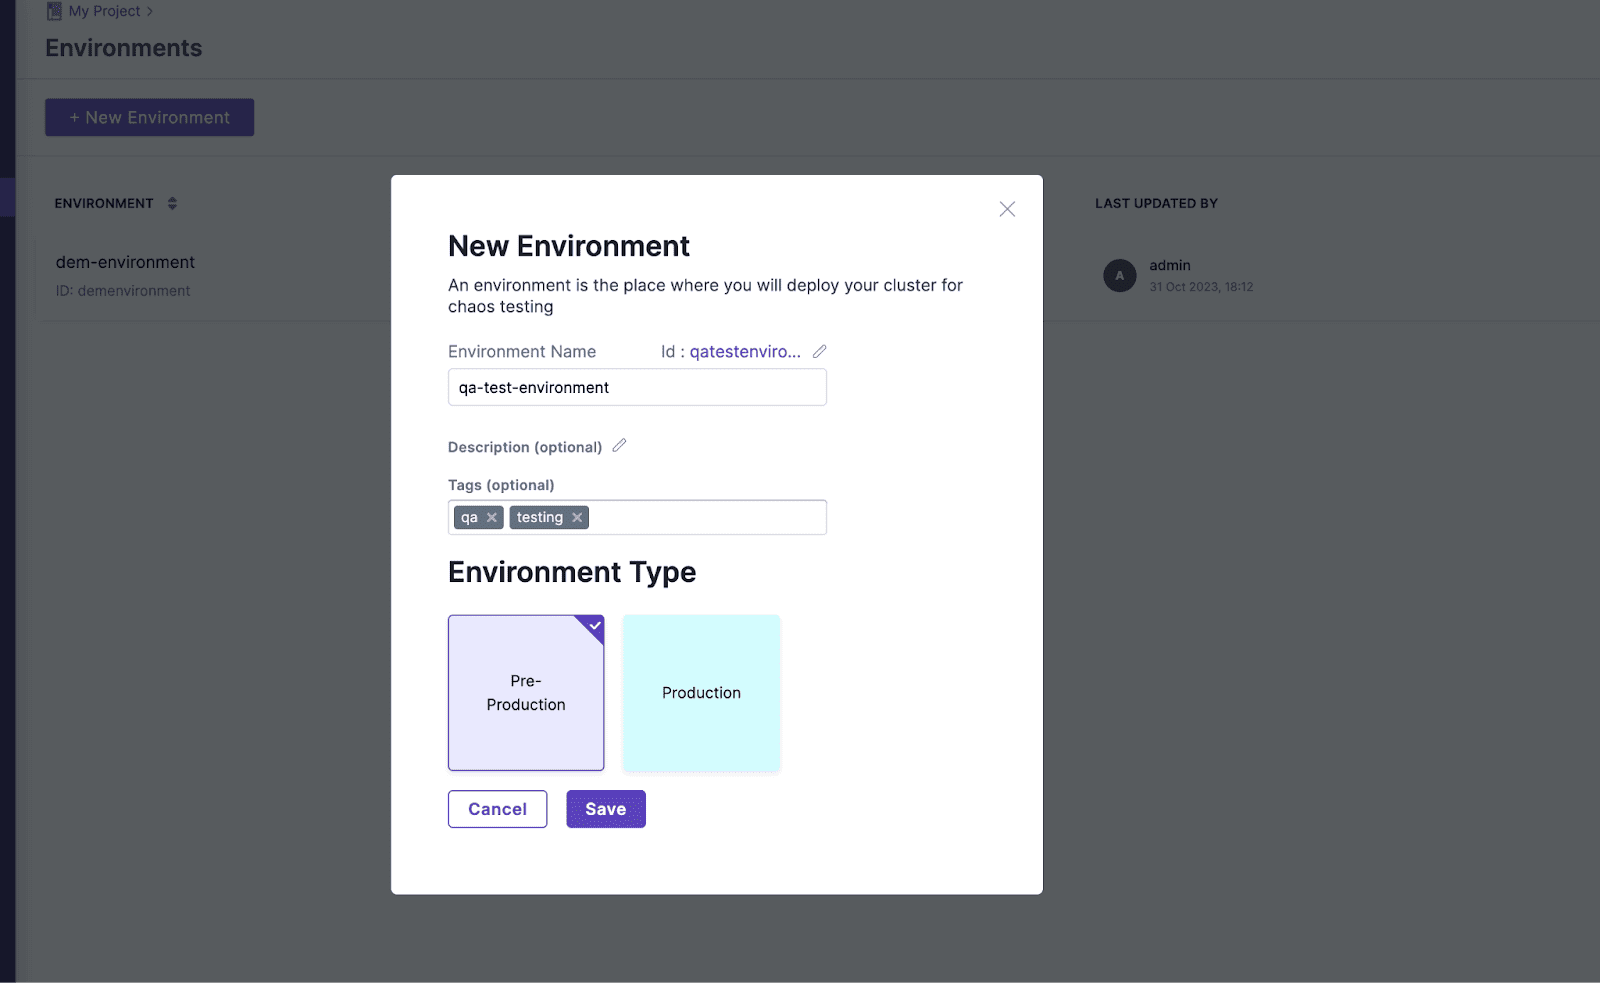 Screenshot showing new environment page on Litmus, enter "qa-test-environment" on Environment Name, QA, testing for tags, and select Pre-Production for environment type